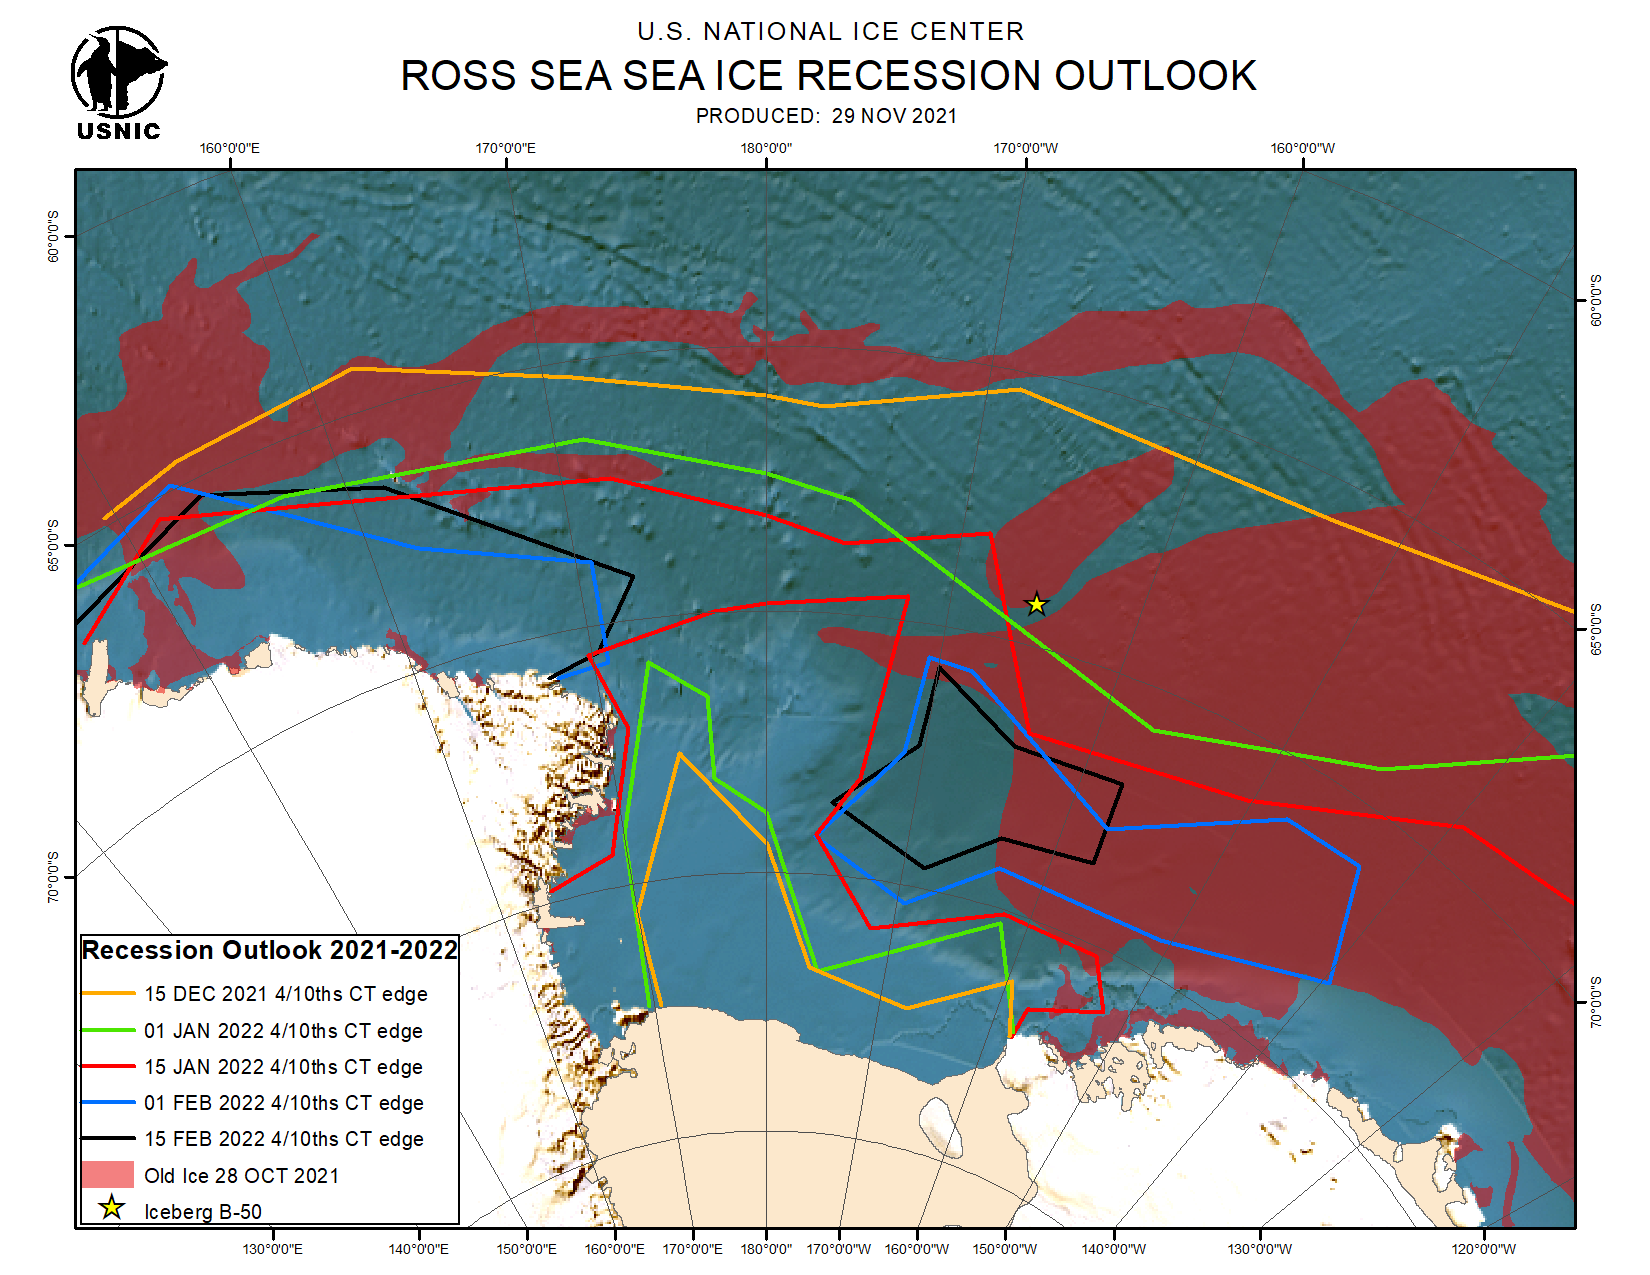 Thumbnail image of ice edge recession outlook 
             through the Ross Sea